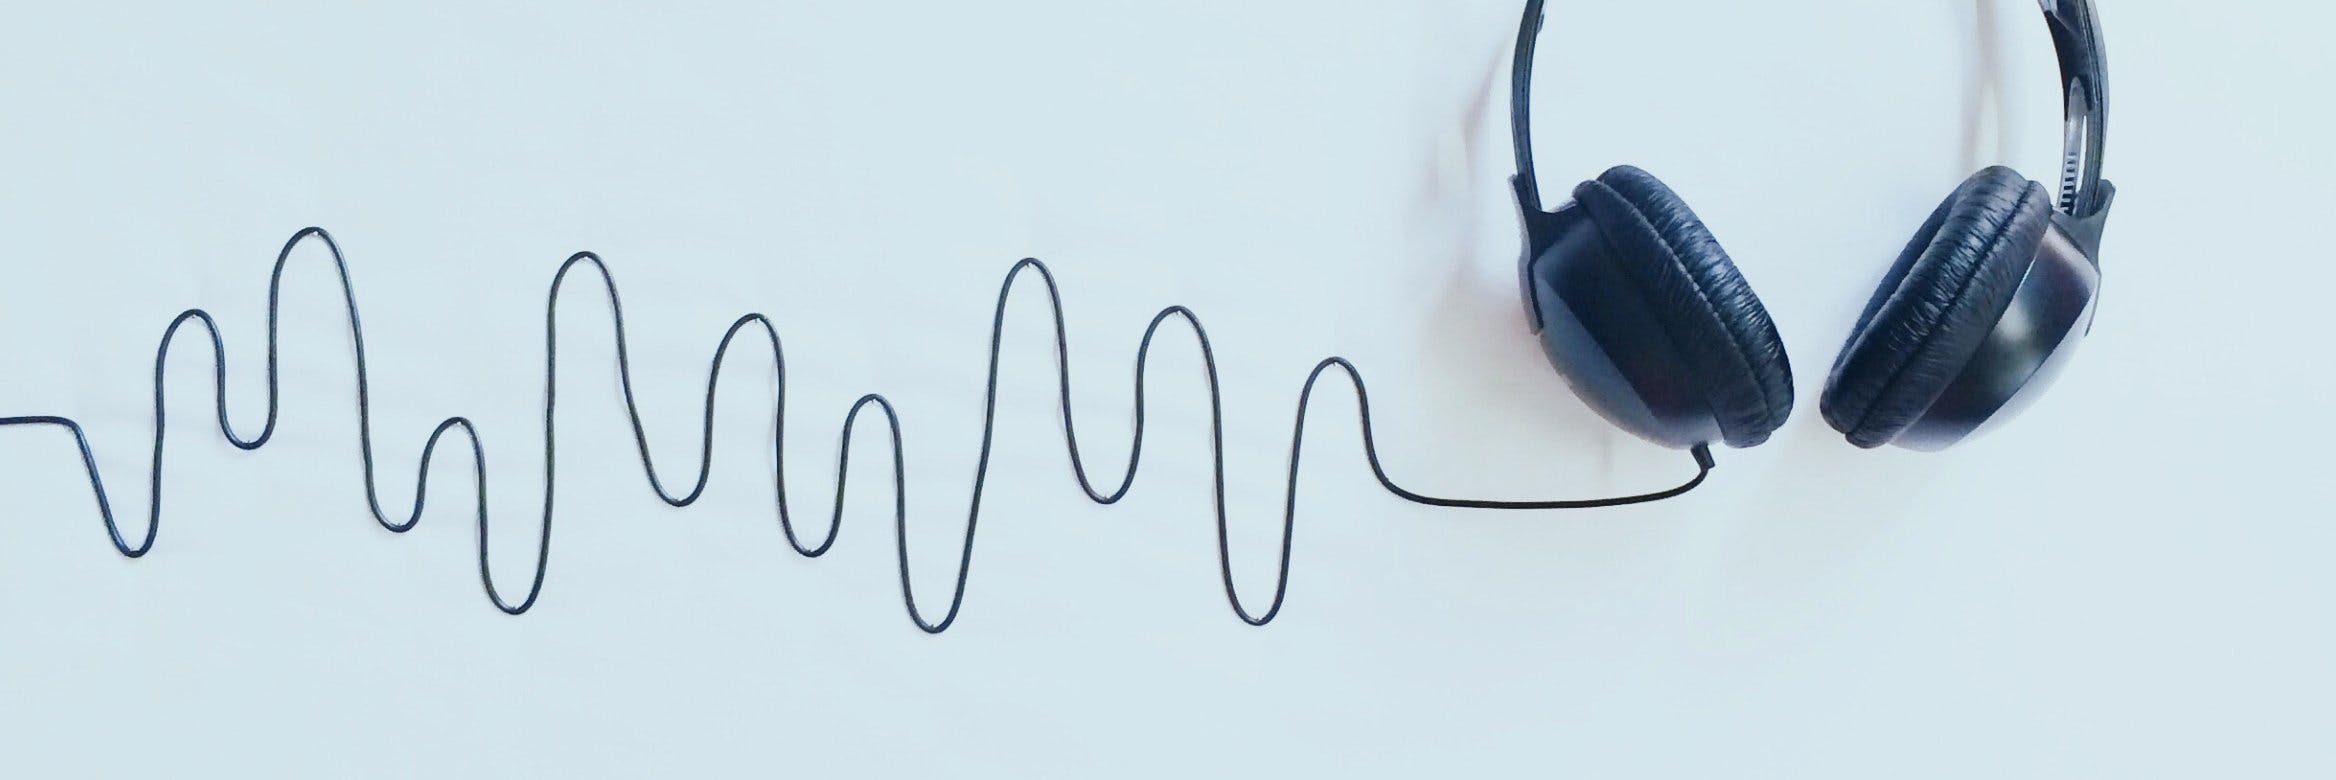 Top 7 UX Podcasts to Inspire Product Design